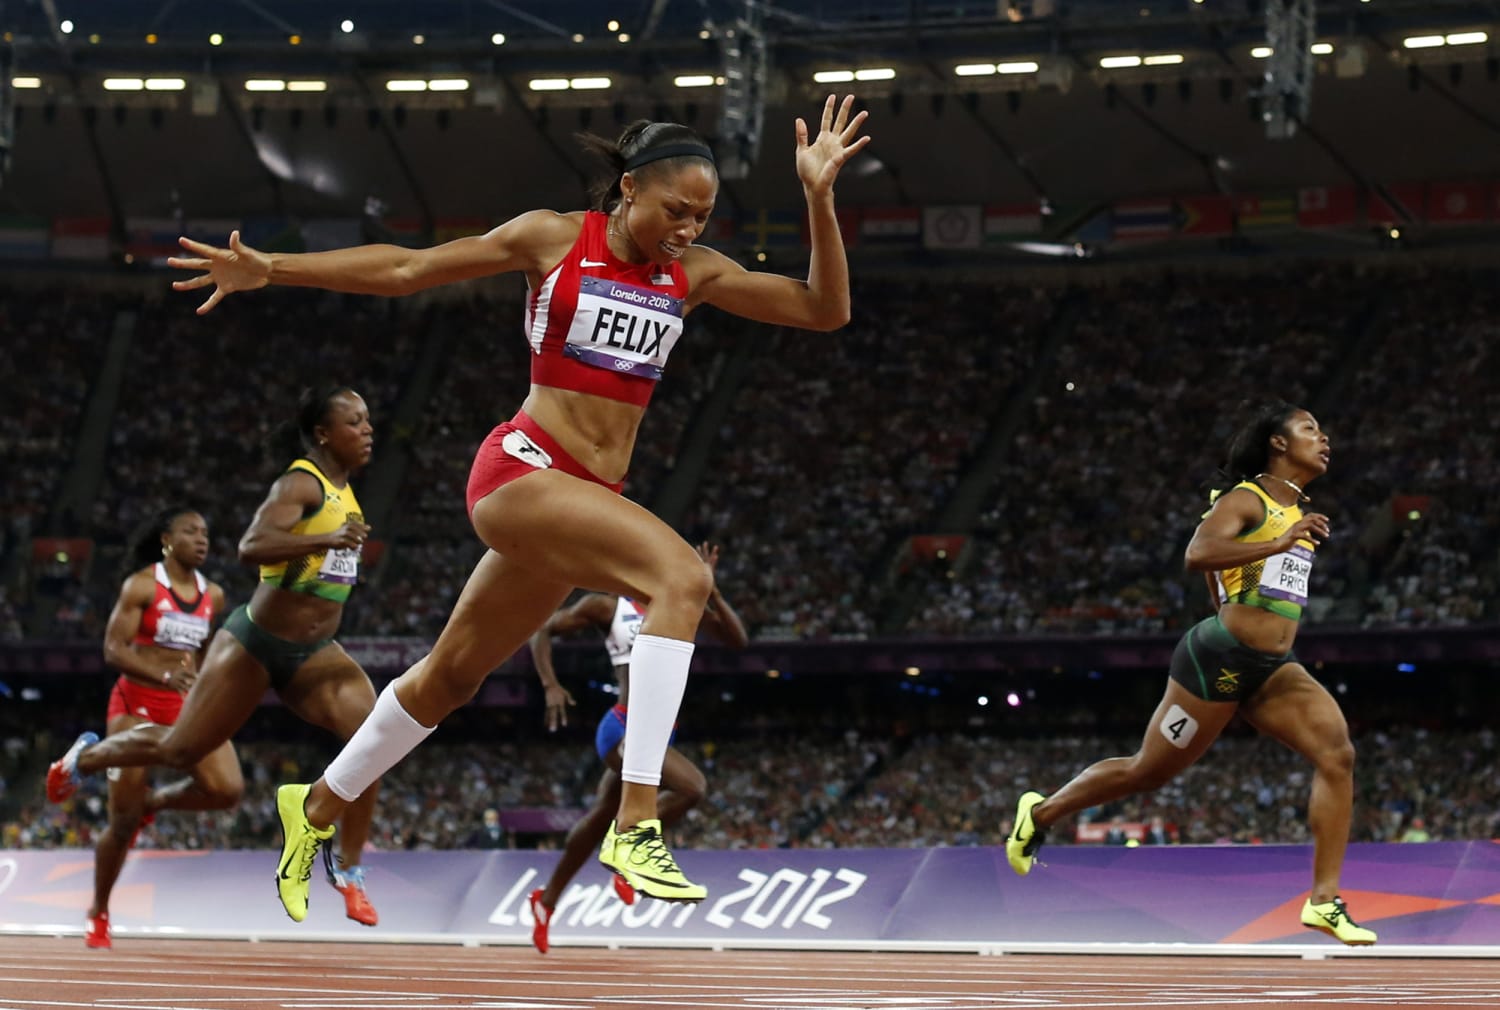 Allyson Felix cements legacy as one of the best track and field Olympians  of all time with bronze in Tokyo